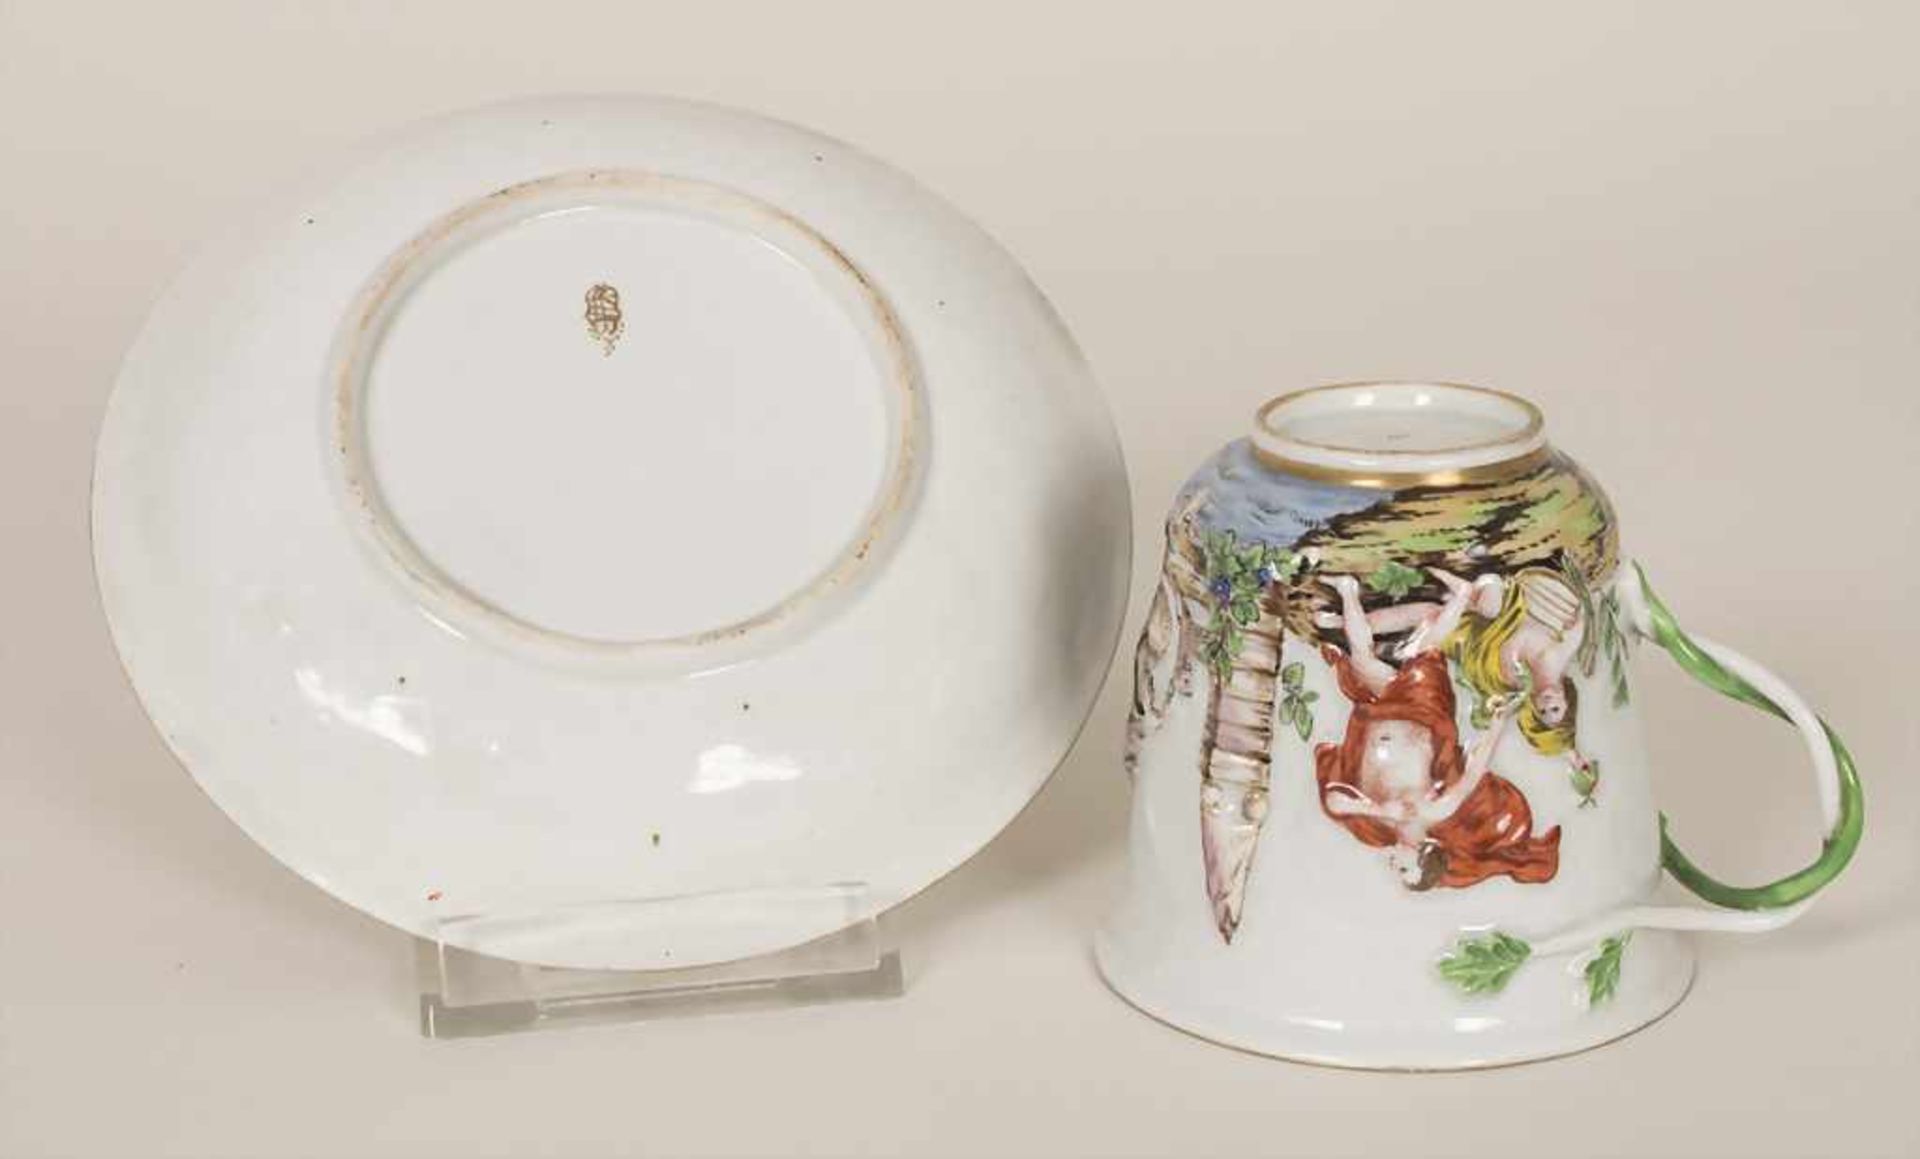 Frühe Tasse und UT mit Reliefdekor / An early cup and saucer with relief decor, Herend, Mitte 19. - Image 7 of 8